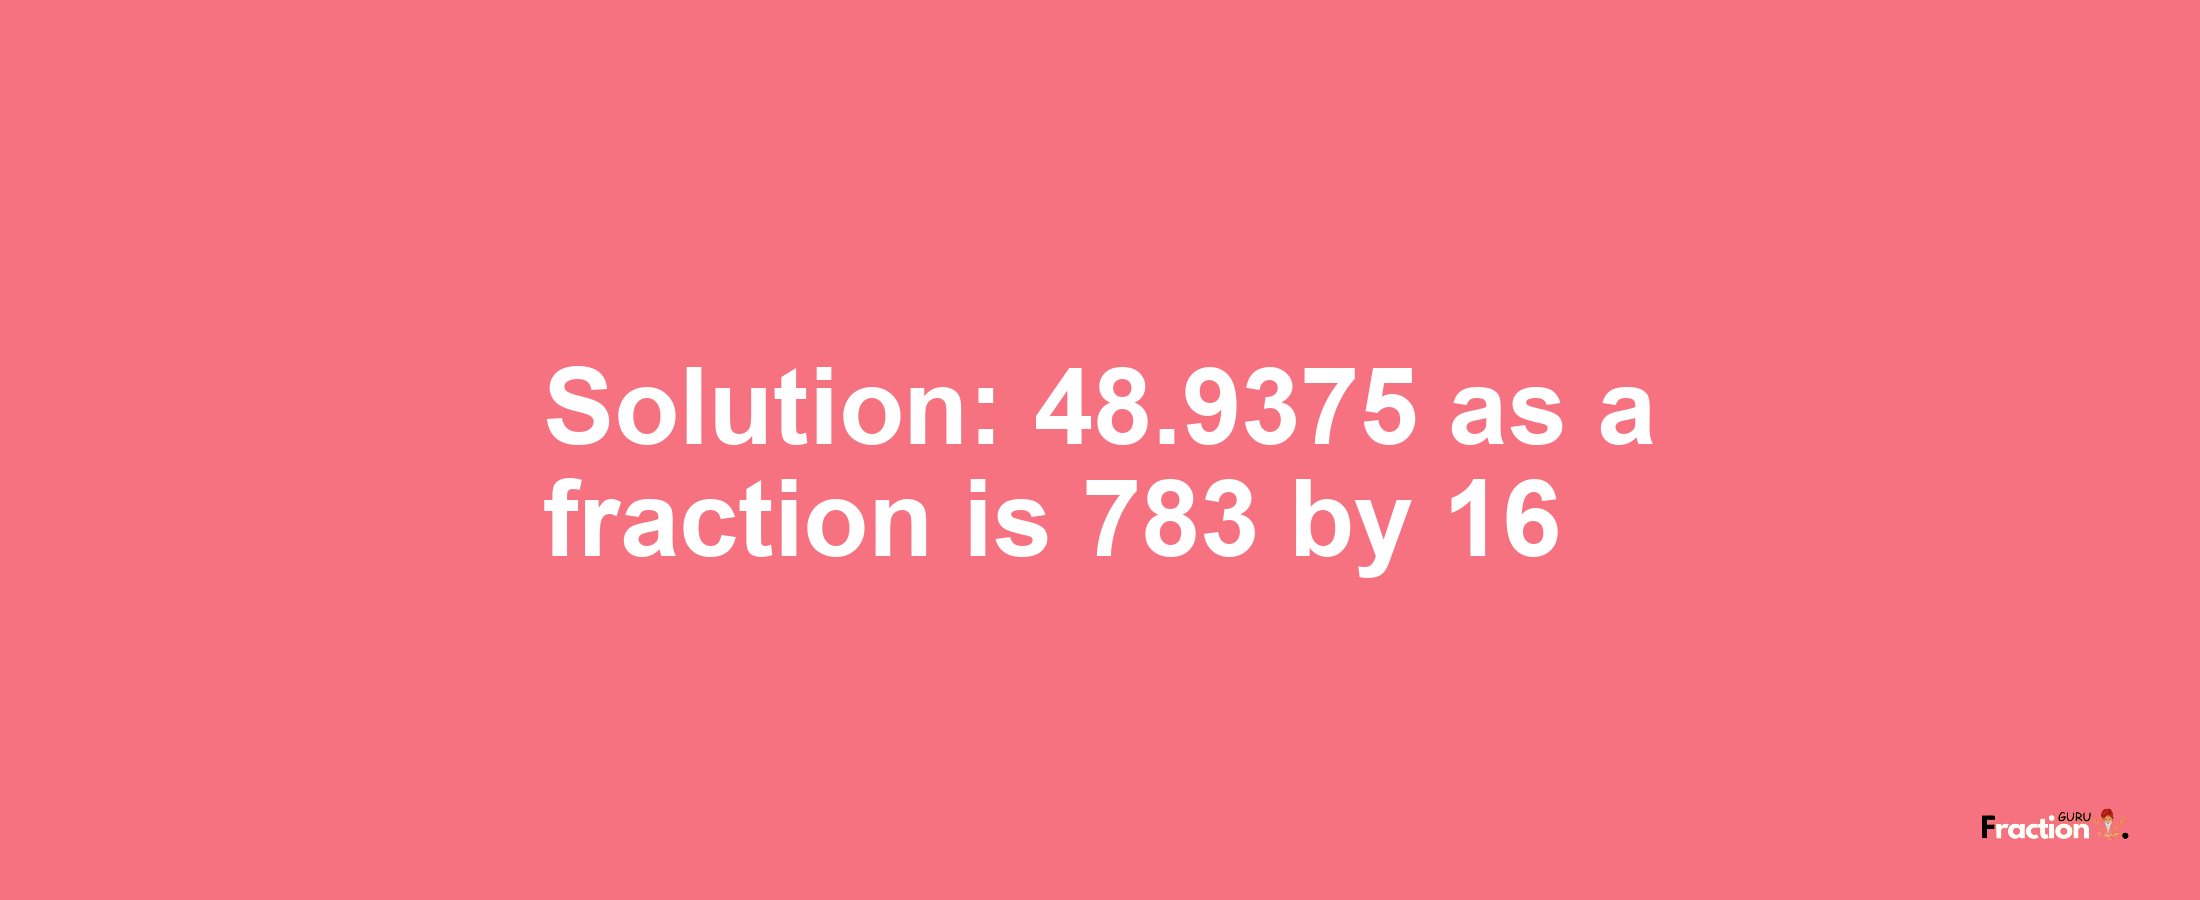 Solution:48.9375 as a fraction is 783/16